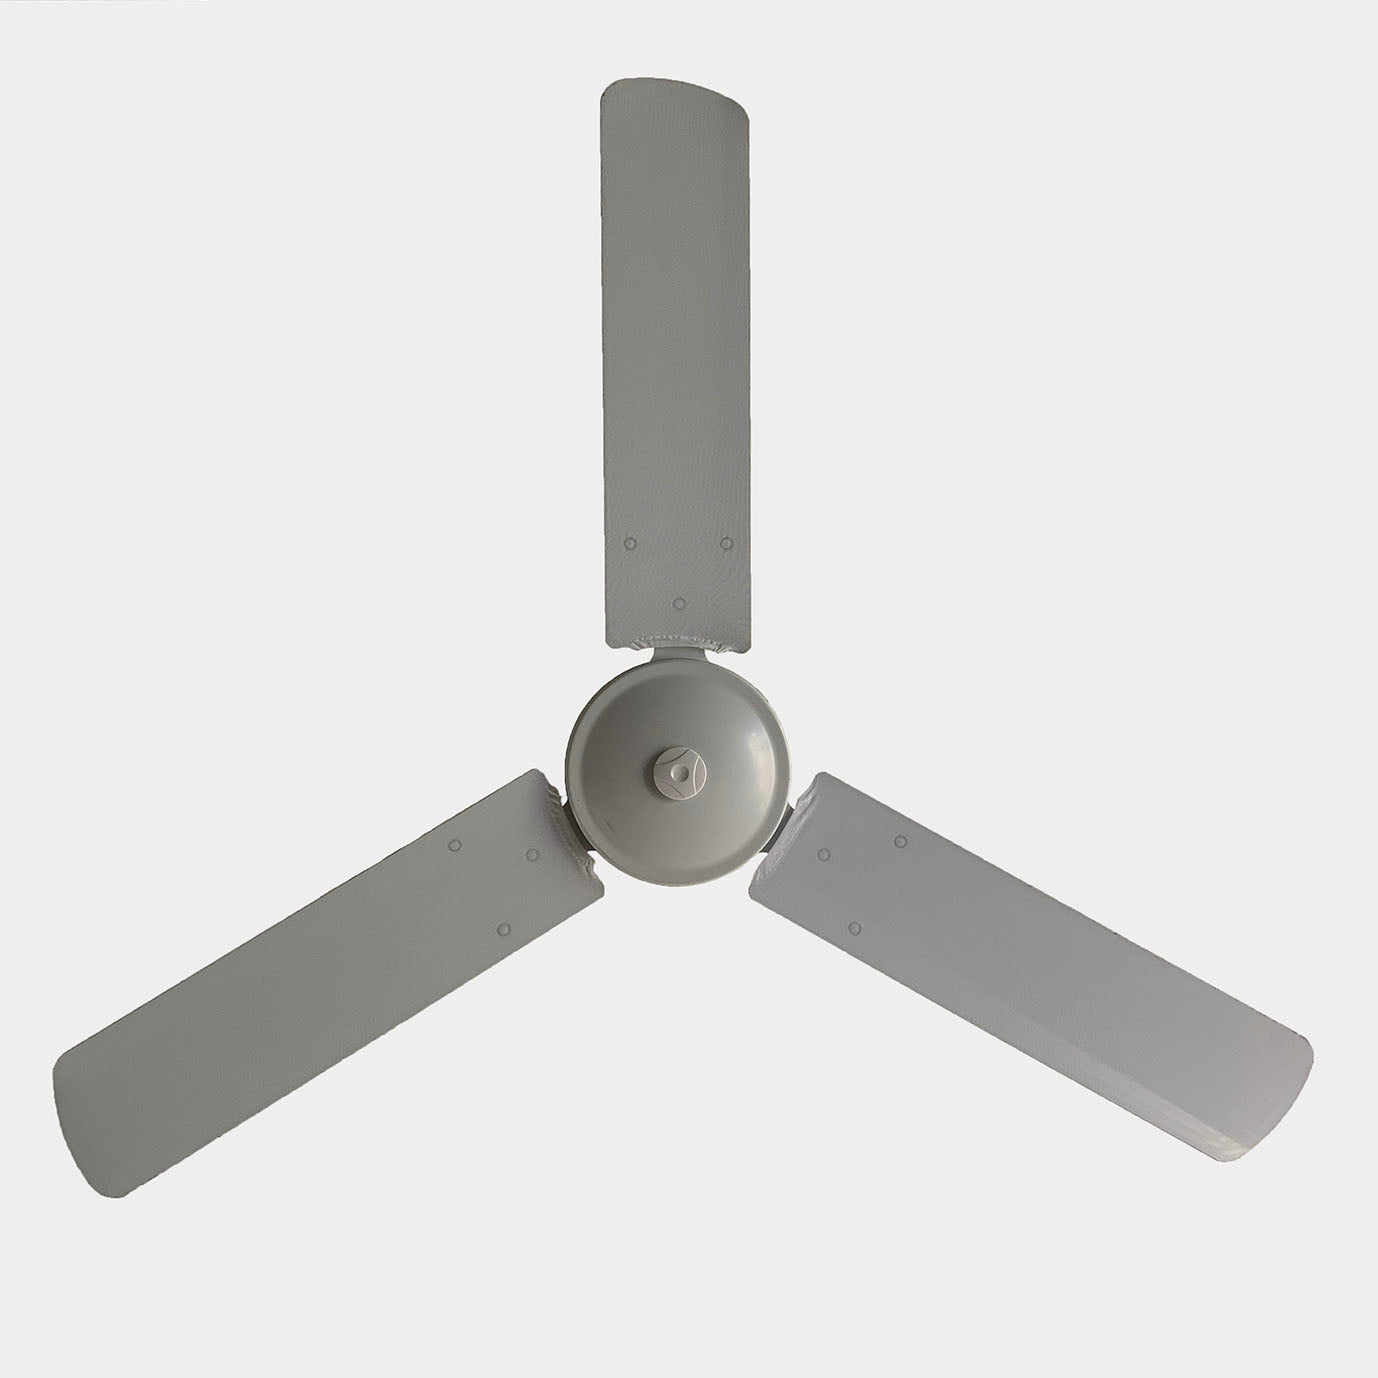 Three fan blades with white mesh covers